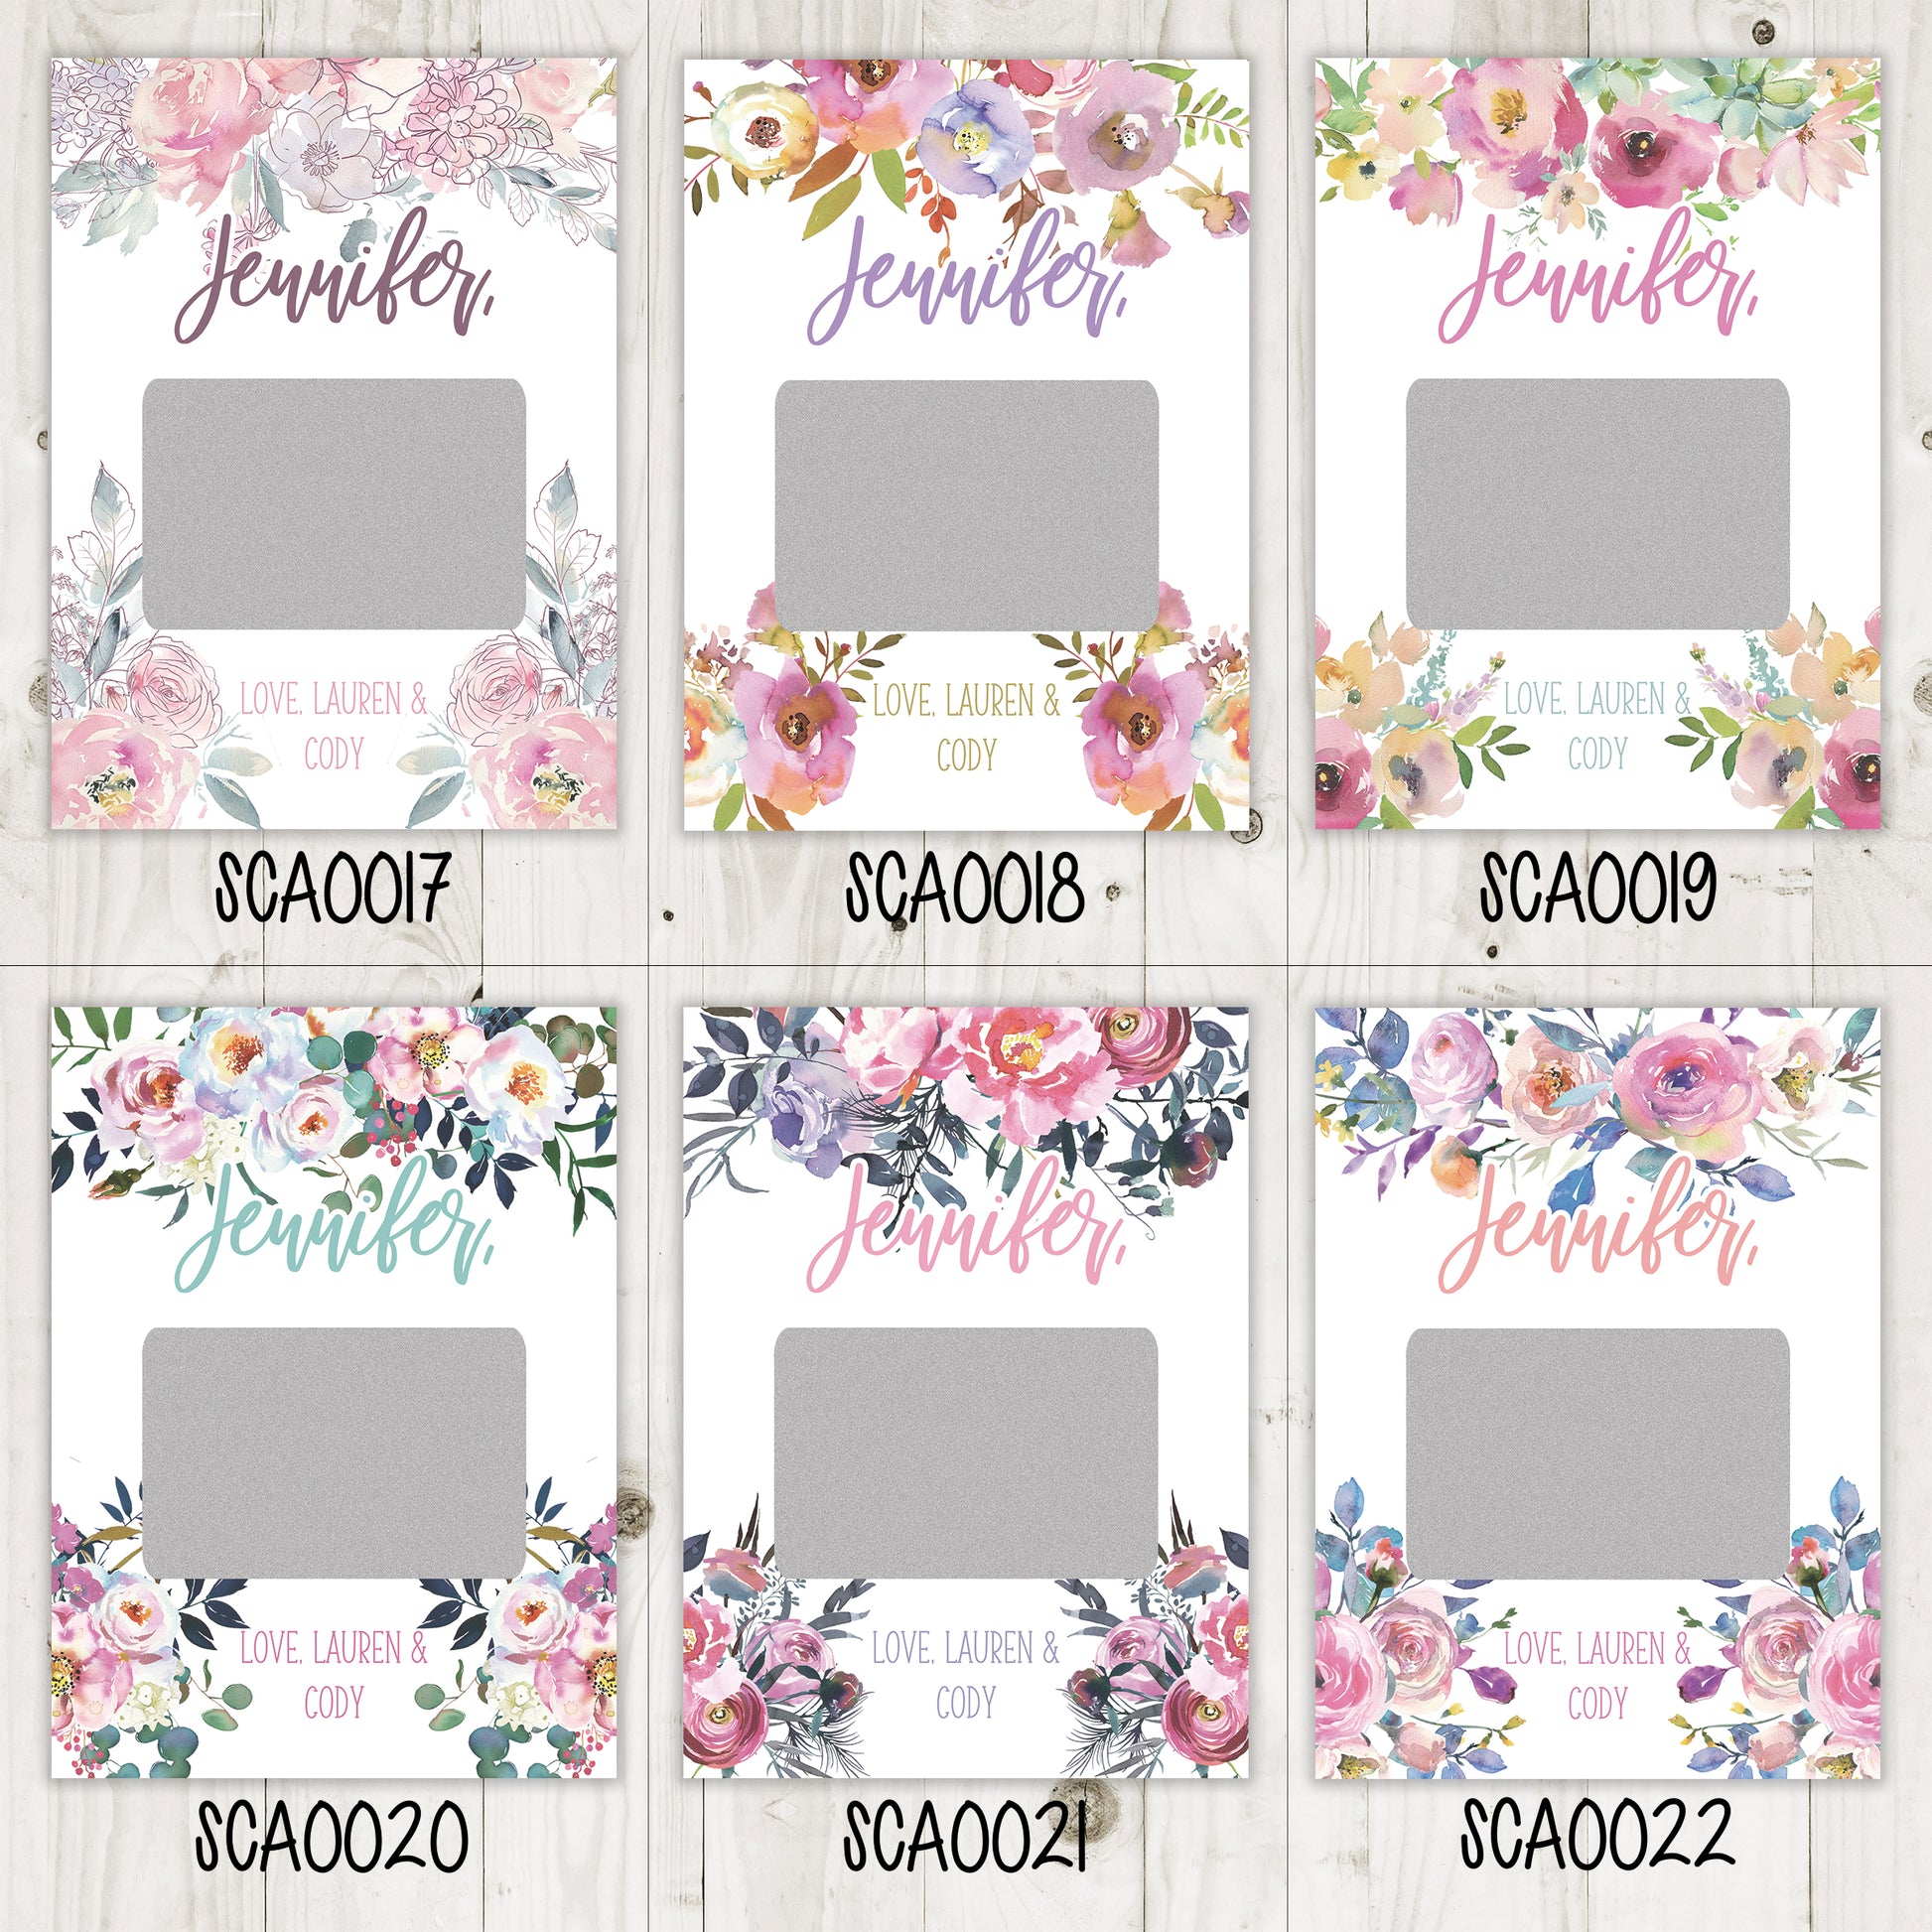 Personalized Flower Girl Scratch Off Card - SCA0017-SCA0022